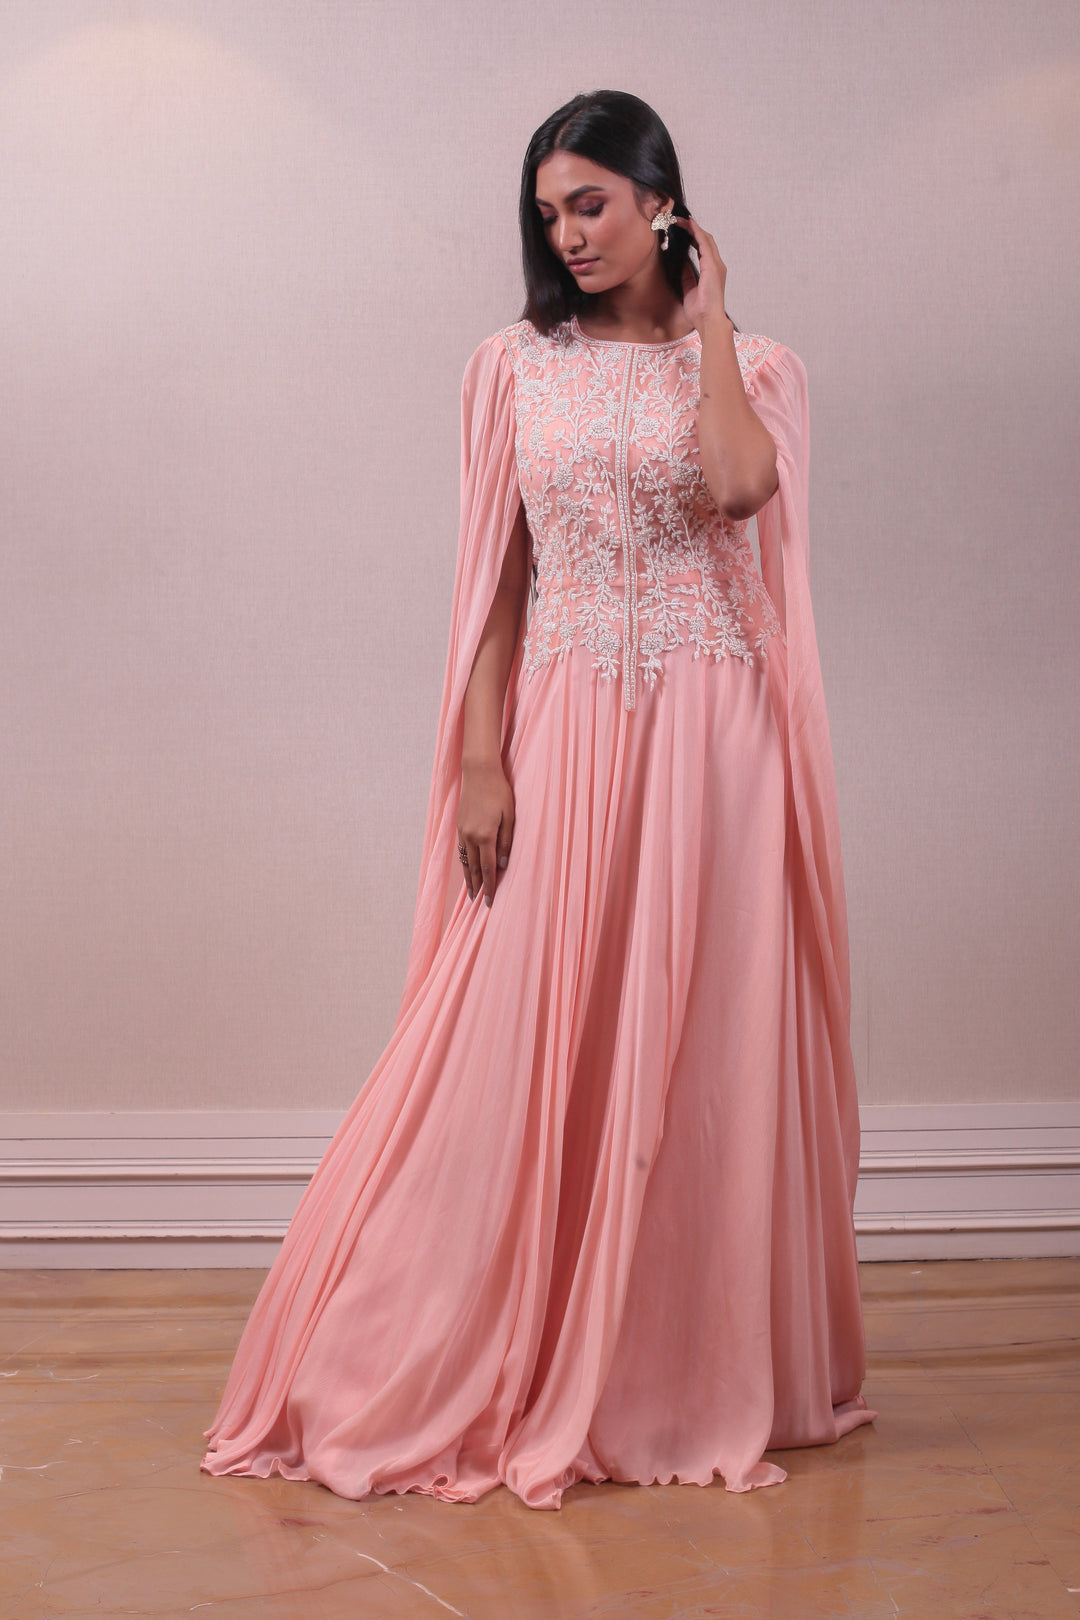 Designer Peach Cape Gown with Modern Silhouettes